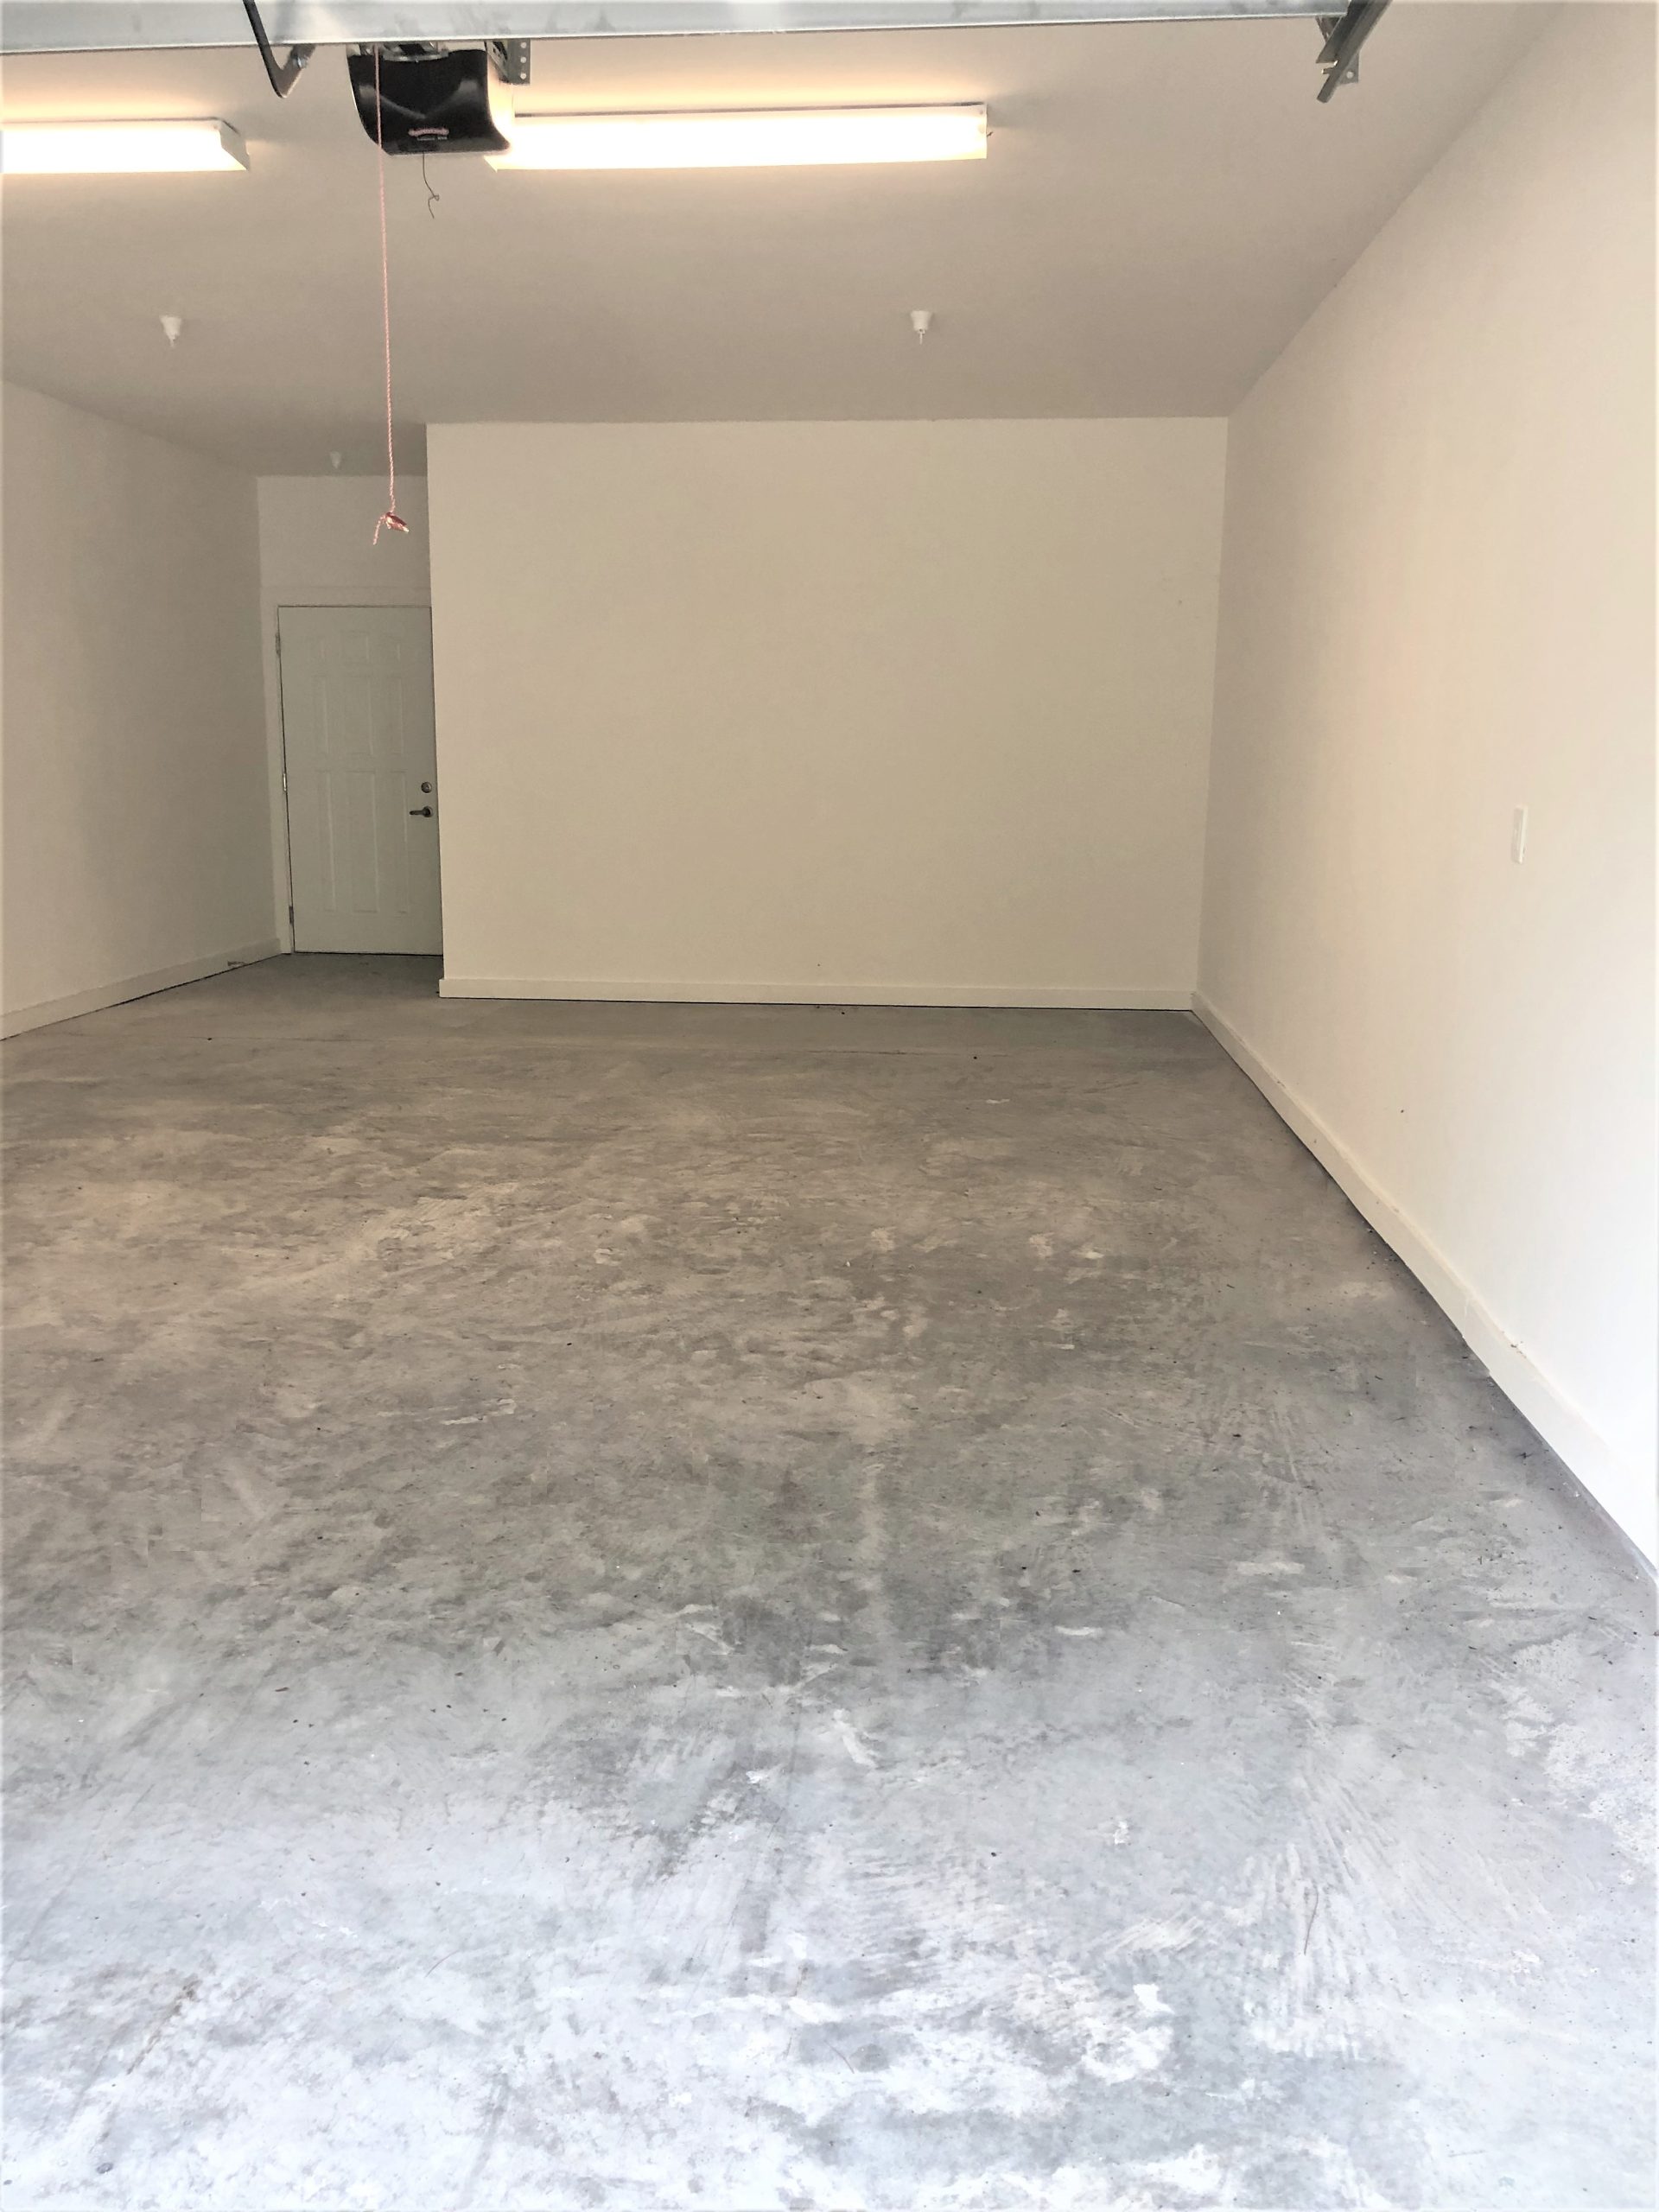 An empty garage with concrete floors and a door, suitable for apartments with garages.